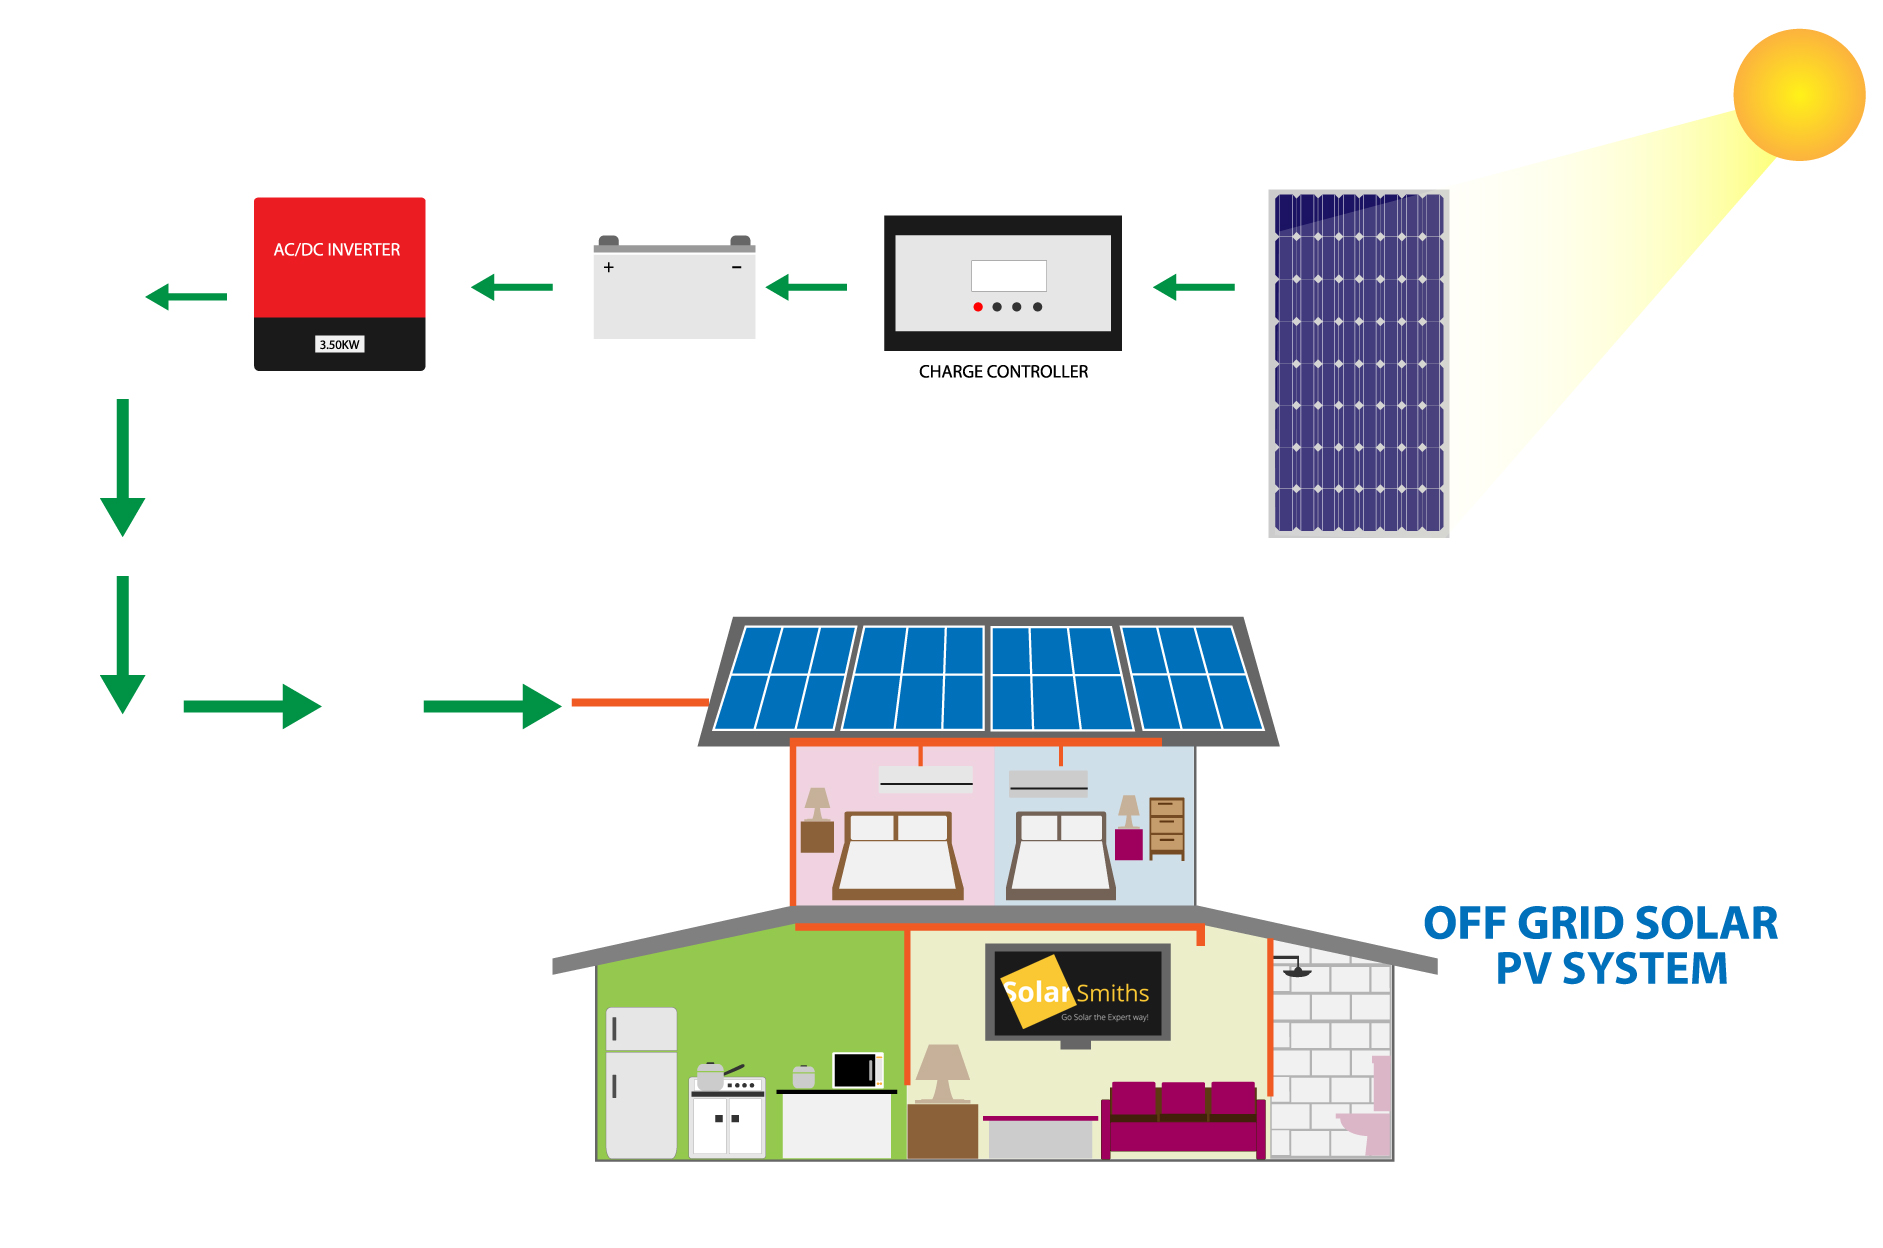 download off grid solar power systems